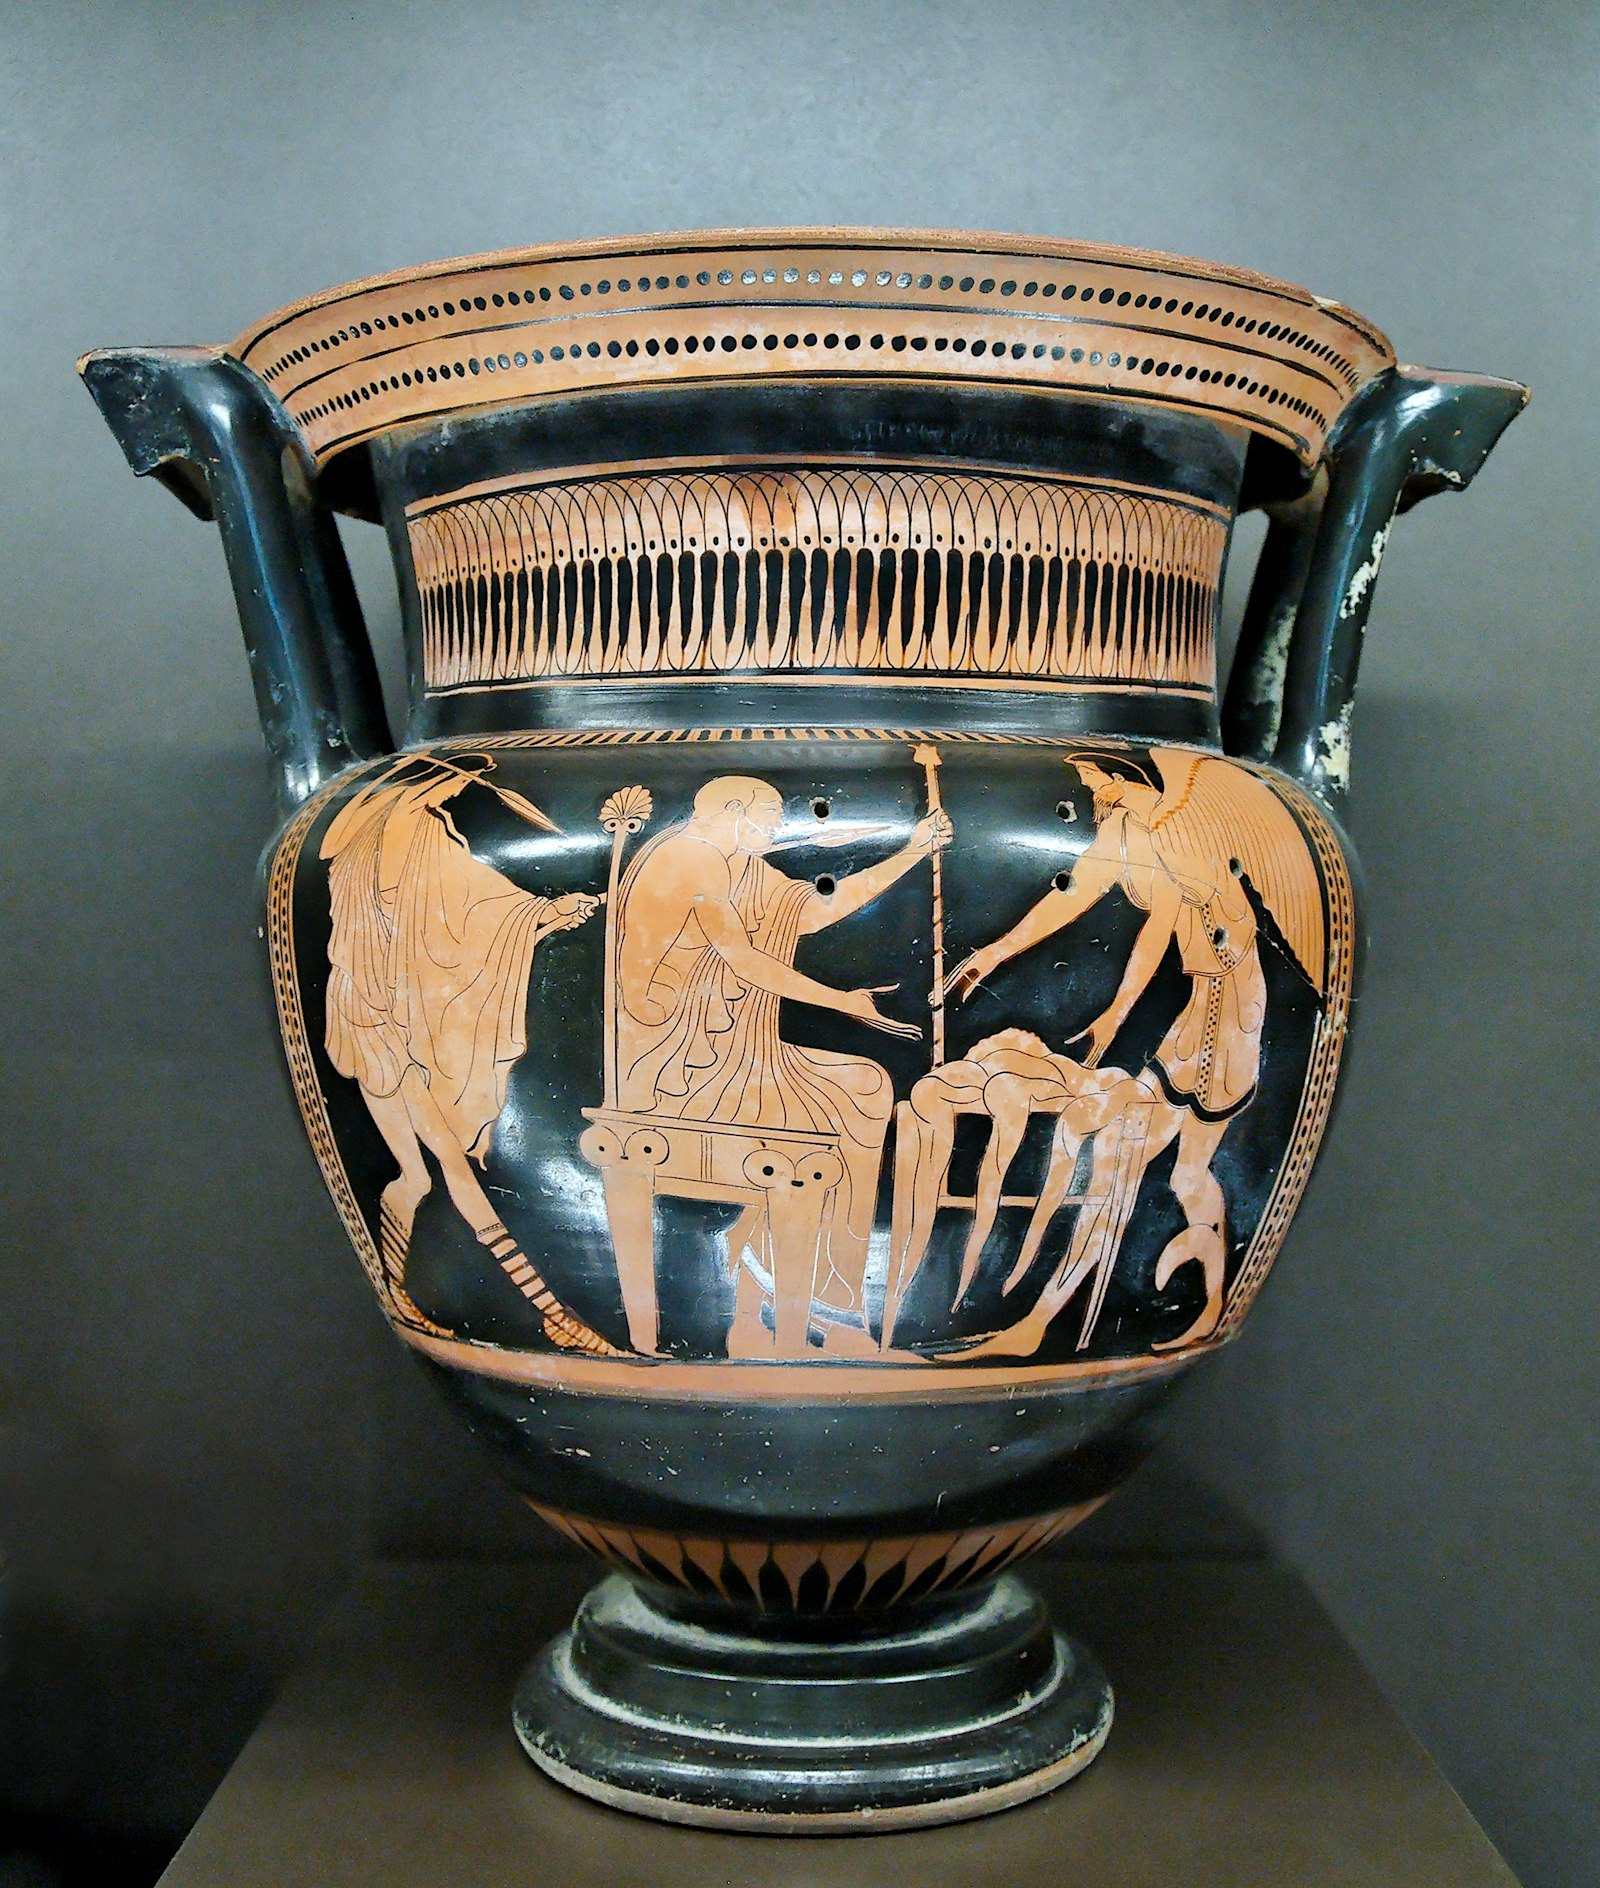 Boreads rescue Phineas from the harpies red figure column krater, 460 BCE